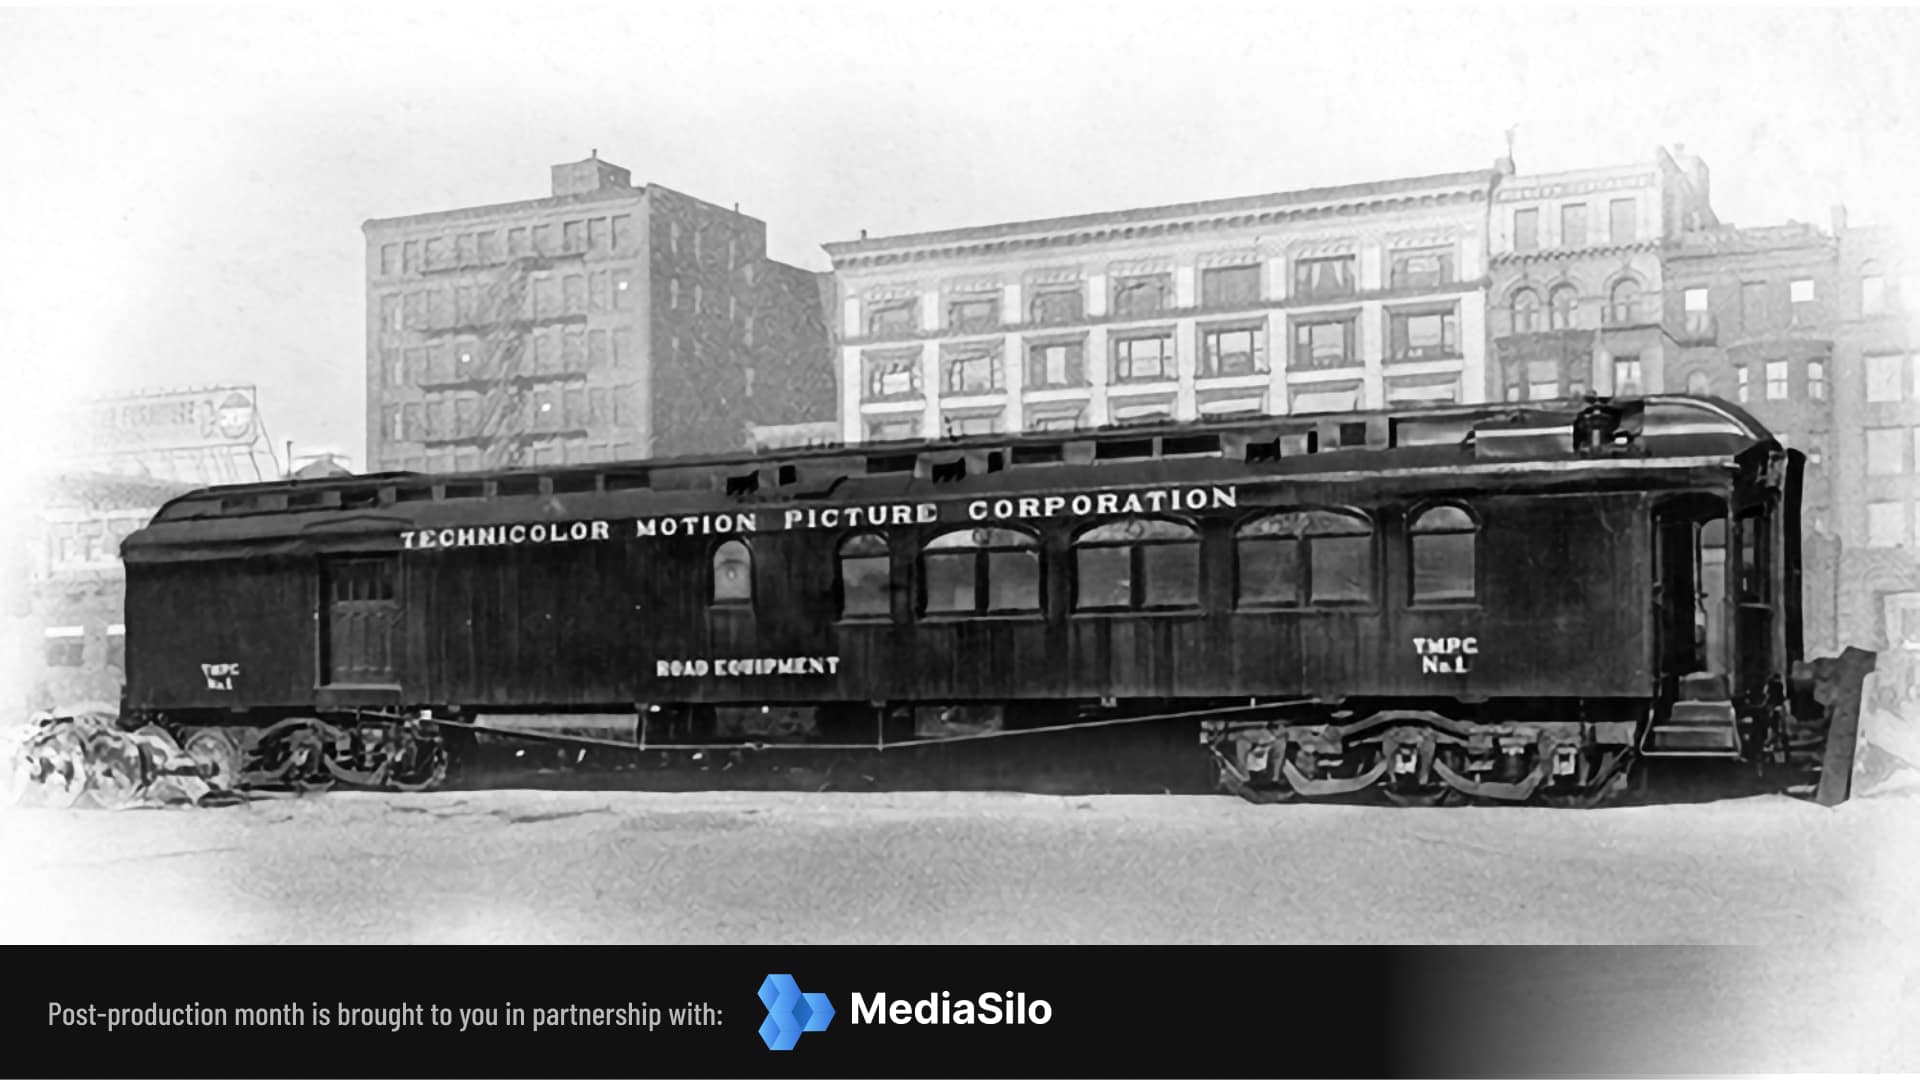 Technicolor's mobile lab, designed to be parked in a siding near Hollywood studios in the 1920s. Pic: Smithsonian